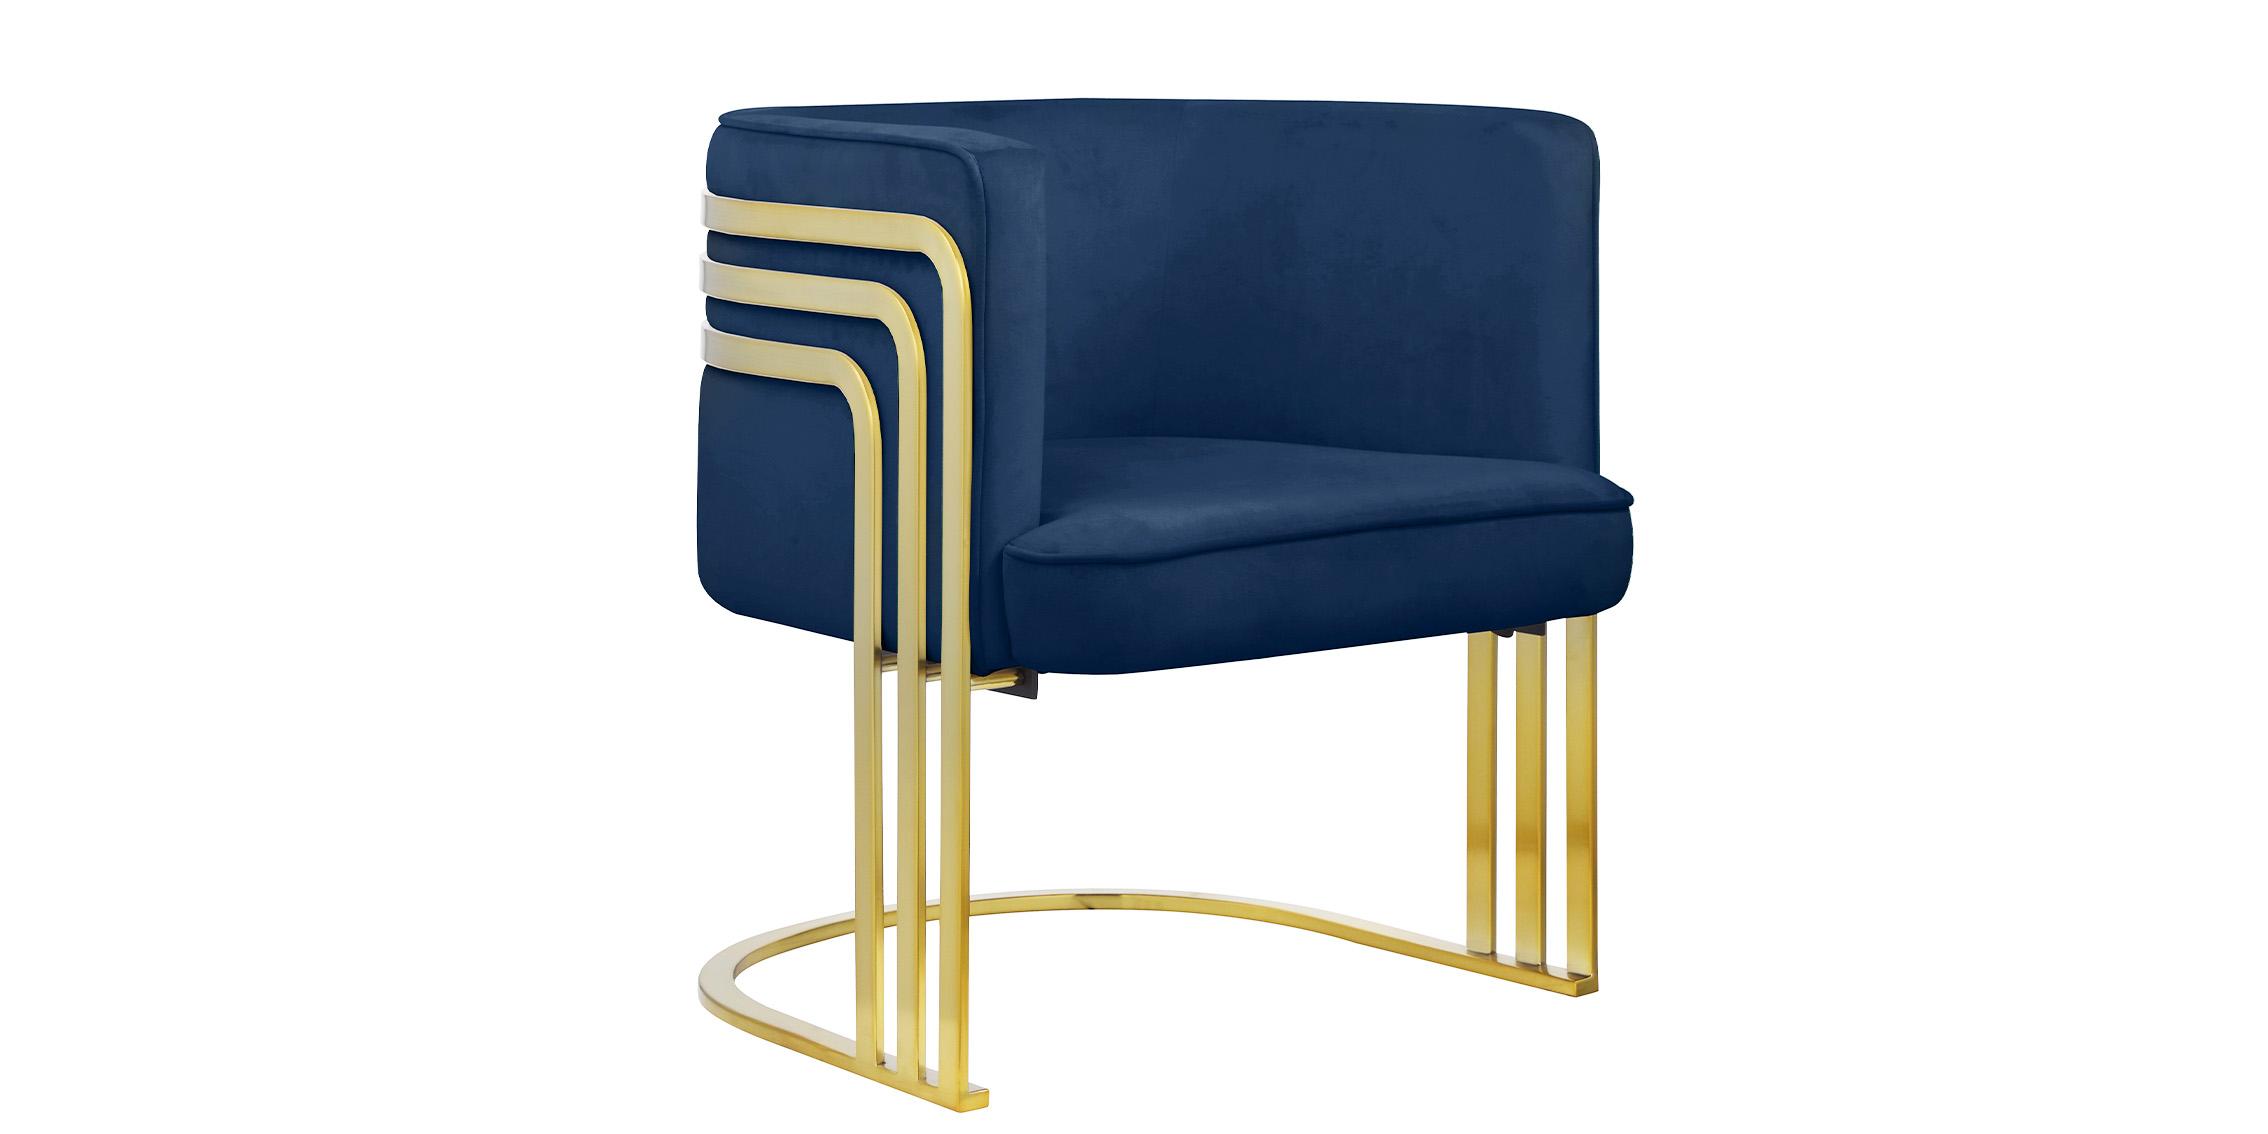 Contemporary Accent Chair RAYS 533Navy 533Navy in Navy, Gold Velvet